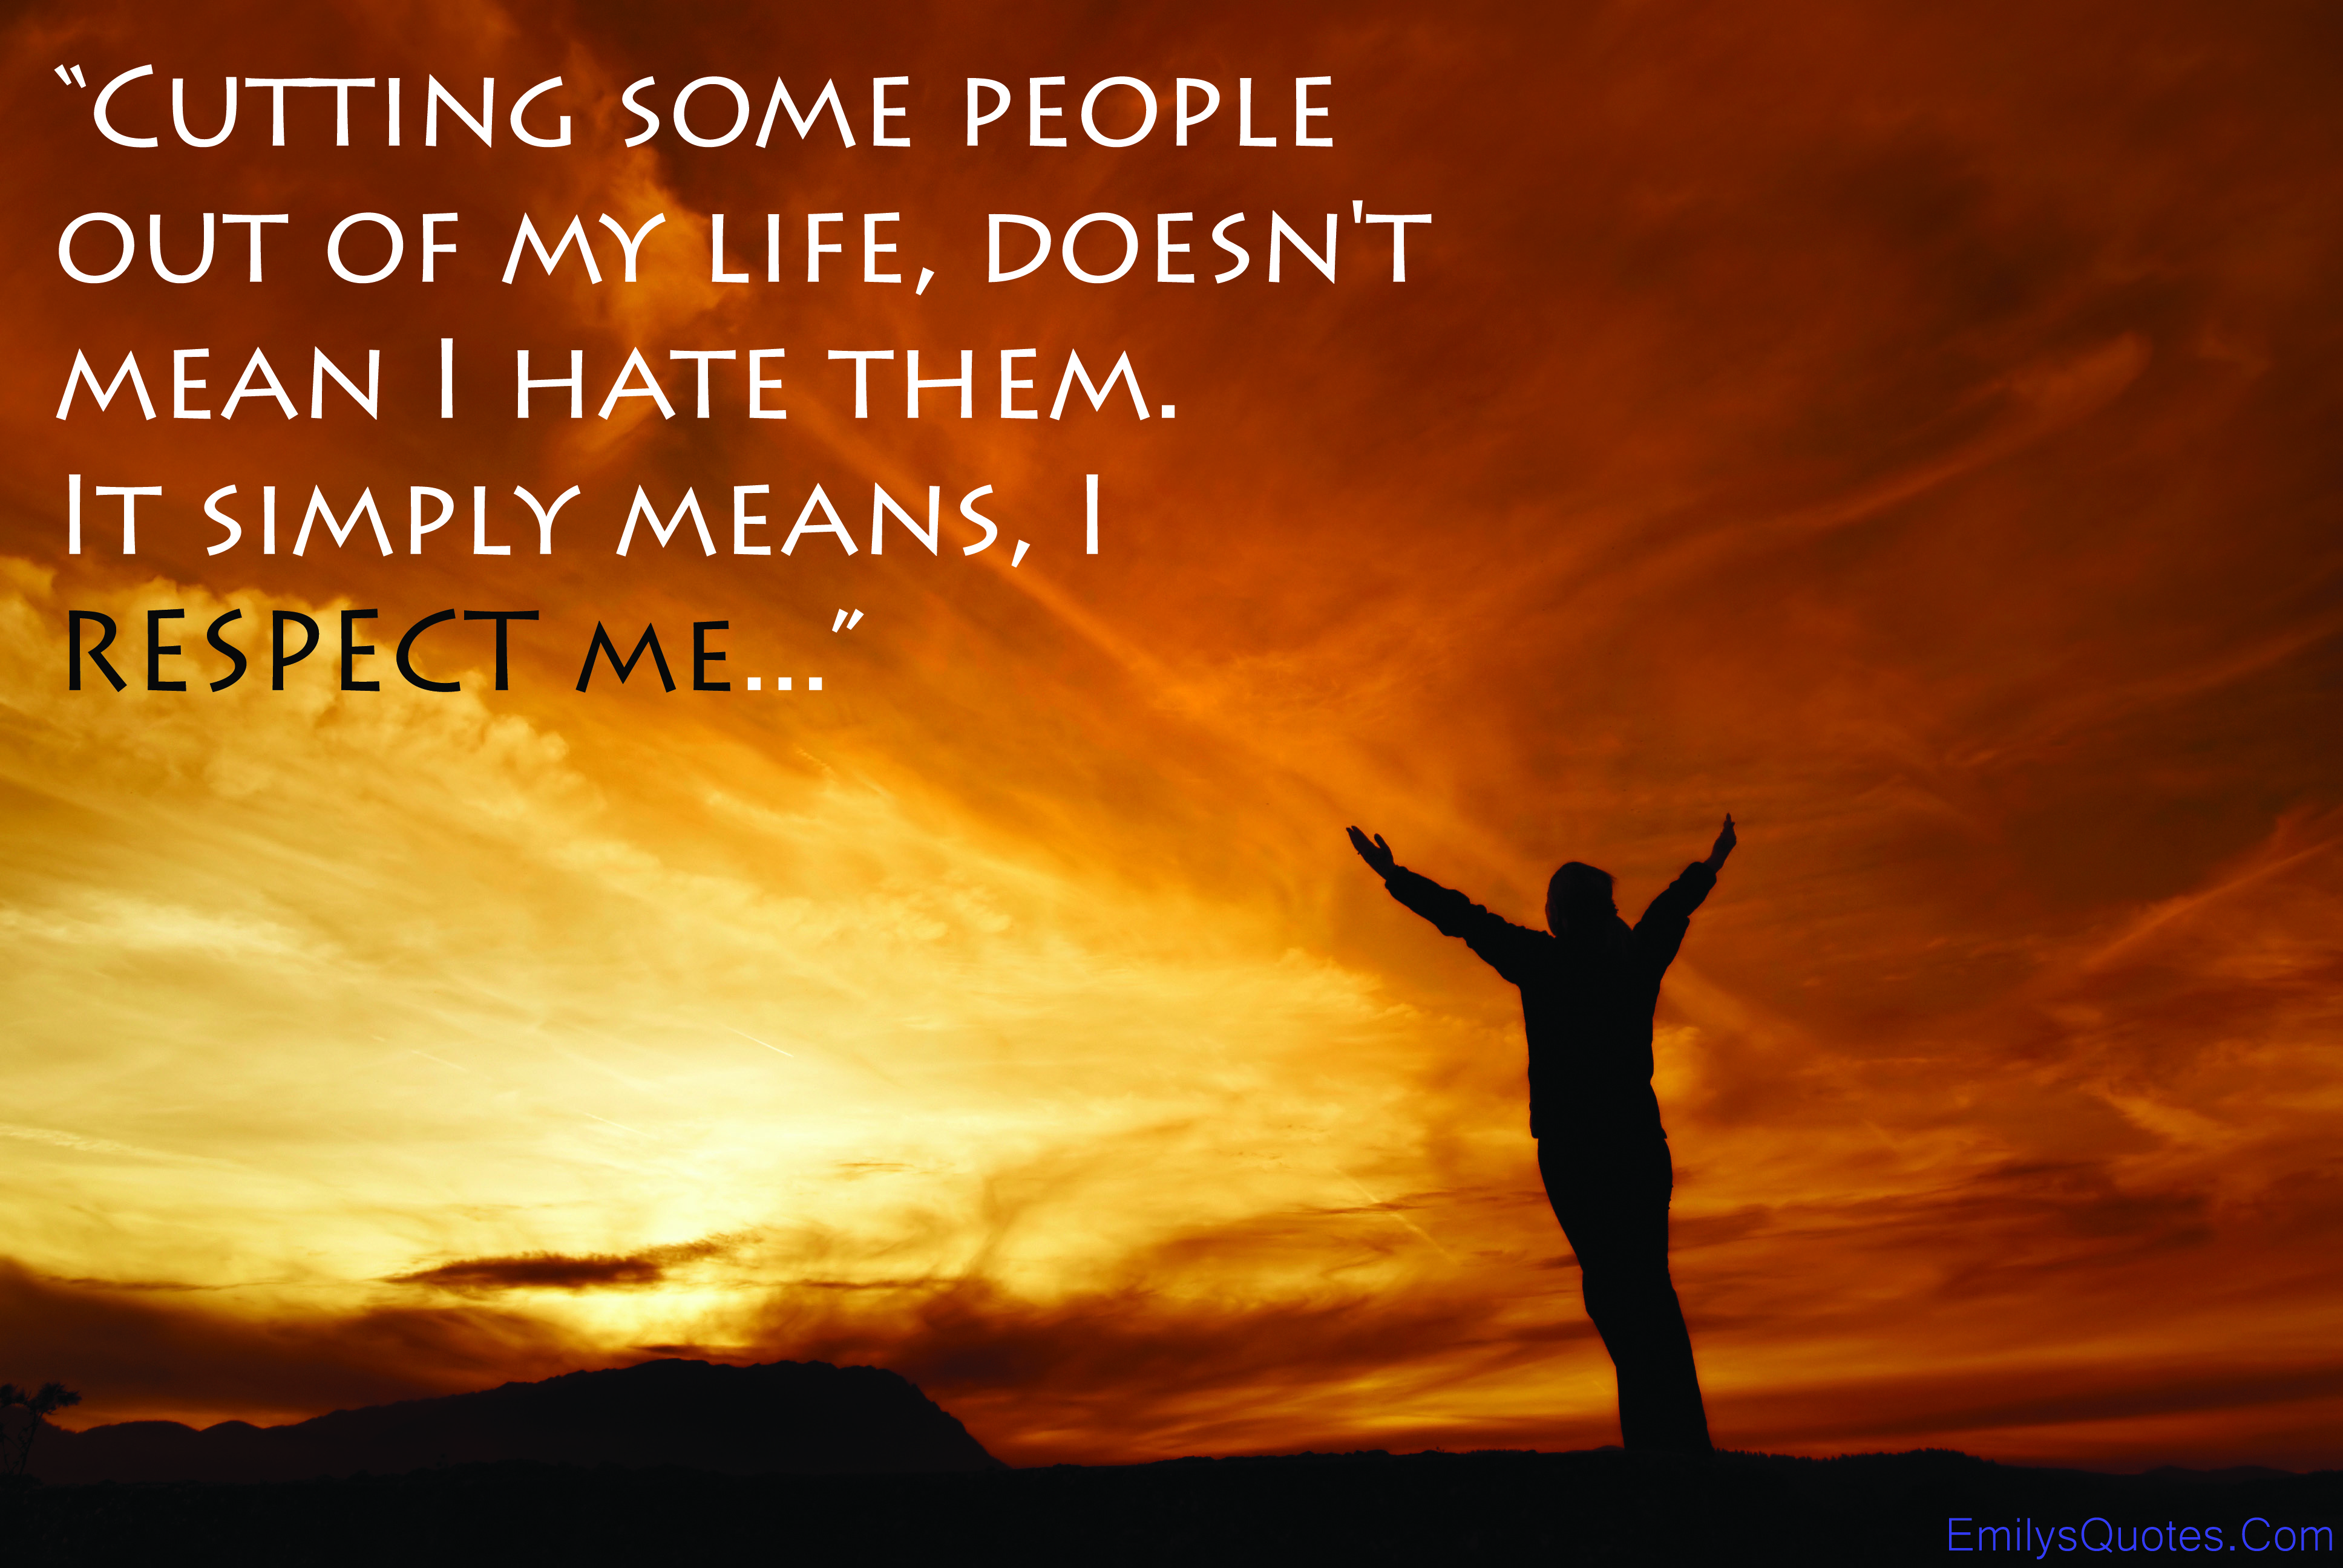 Cutting some people out of my life, doesn’t mean I hate them. It simply means, I RESPECT me